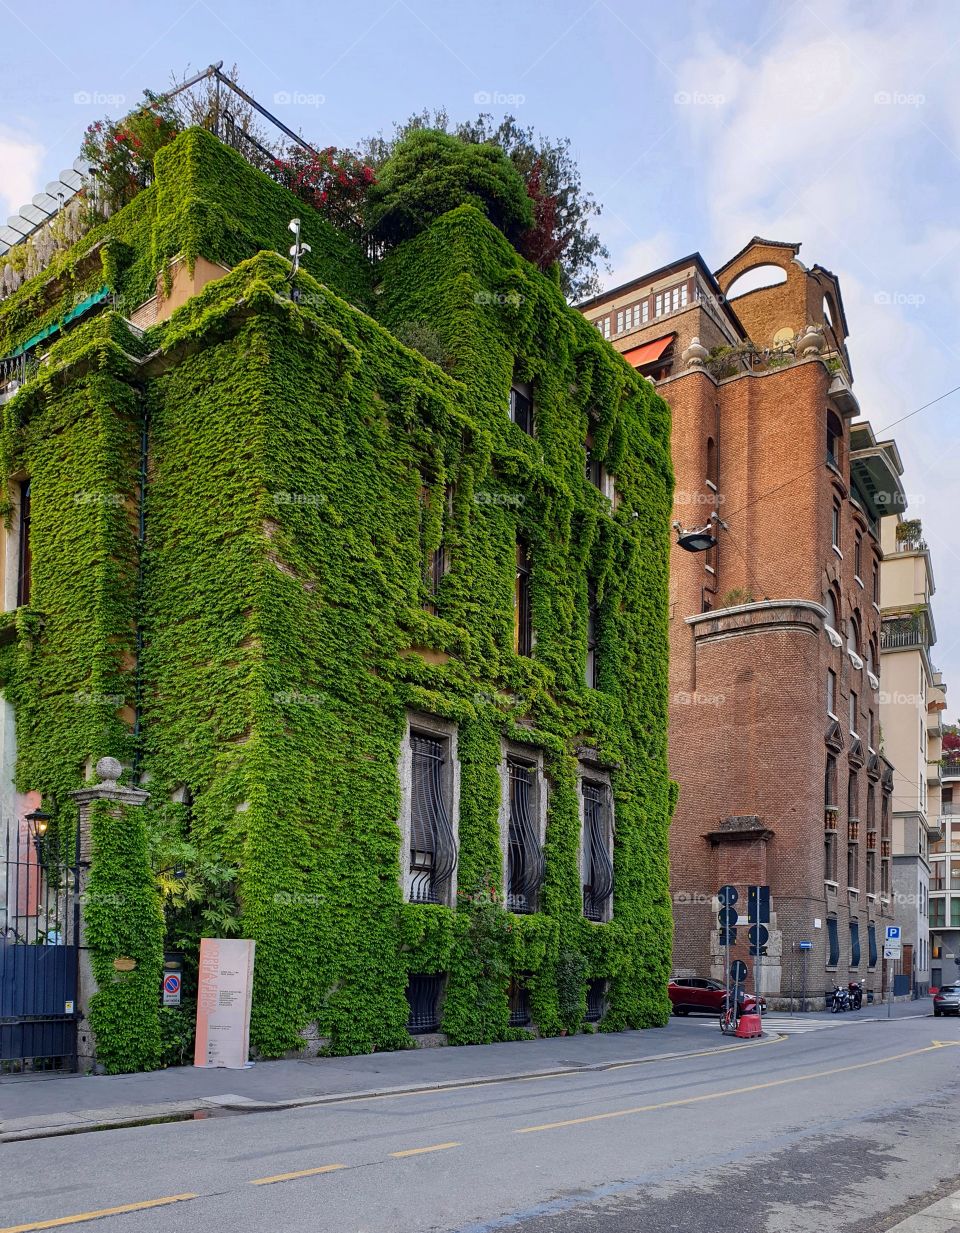 Villa Mozart covered with green vegetation. Street in Milan, Italy